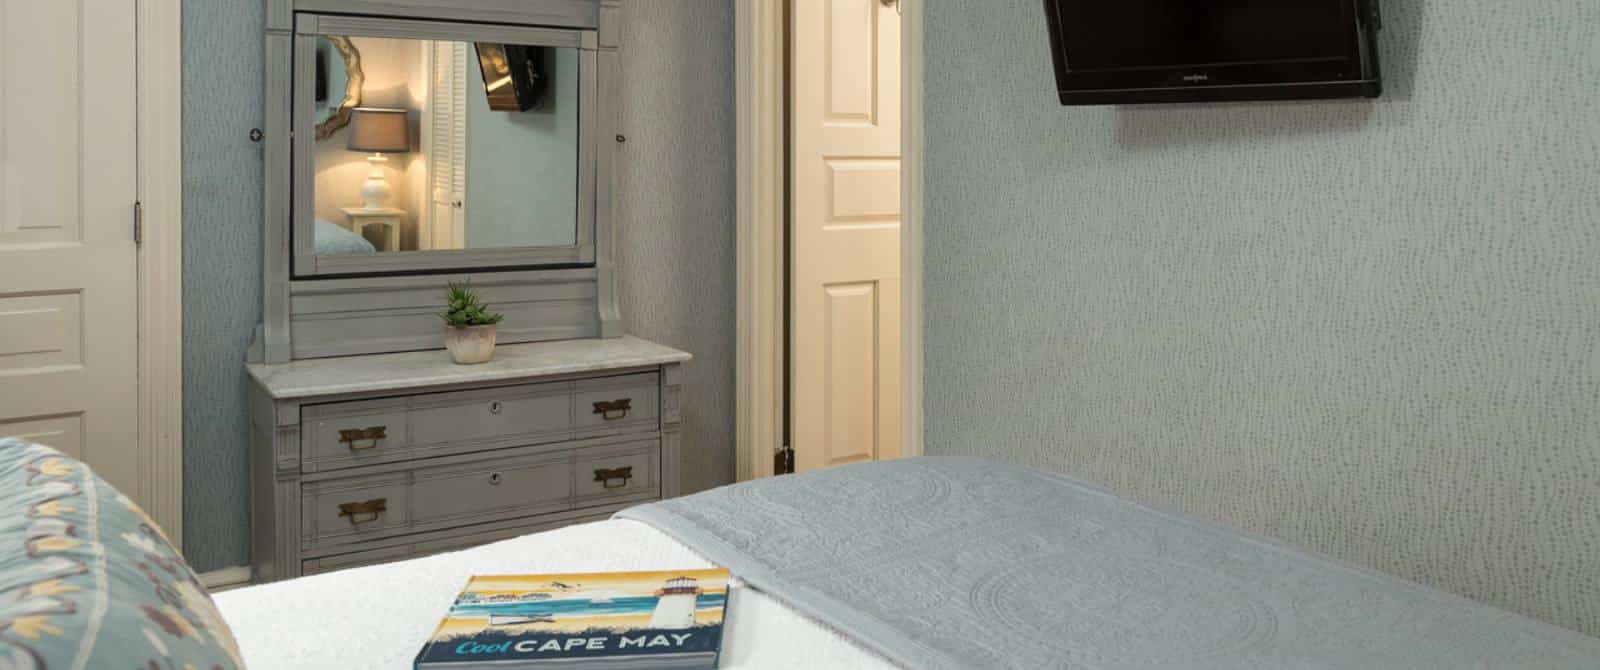 Bedroom with white bedding, gray dresser with mirror, light gray patterned wallpaper, and wall-mounted flat-screen TV